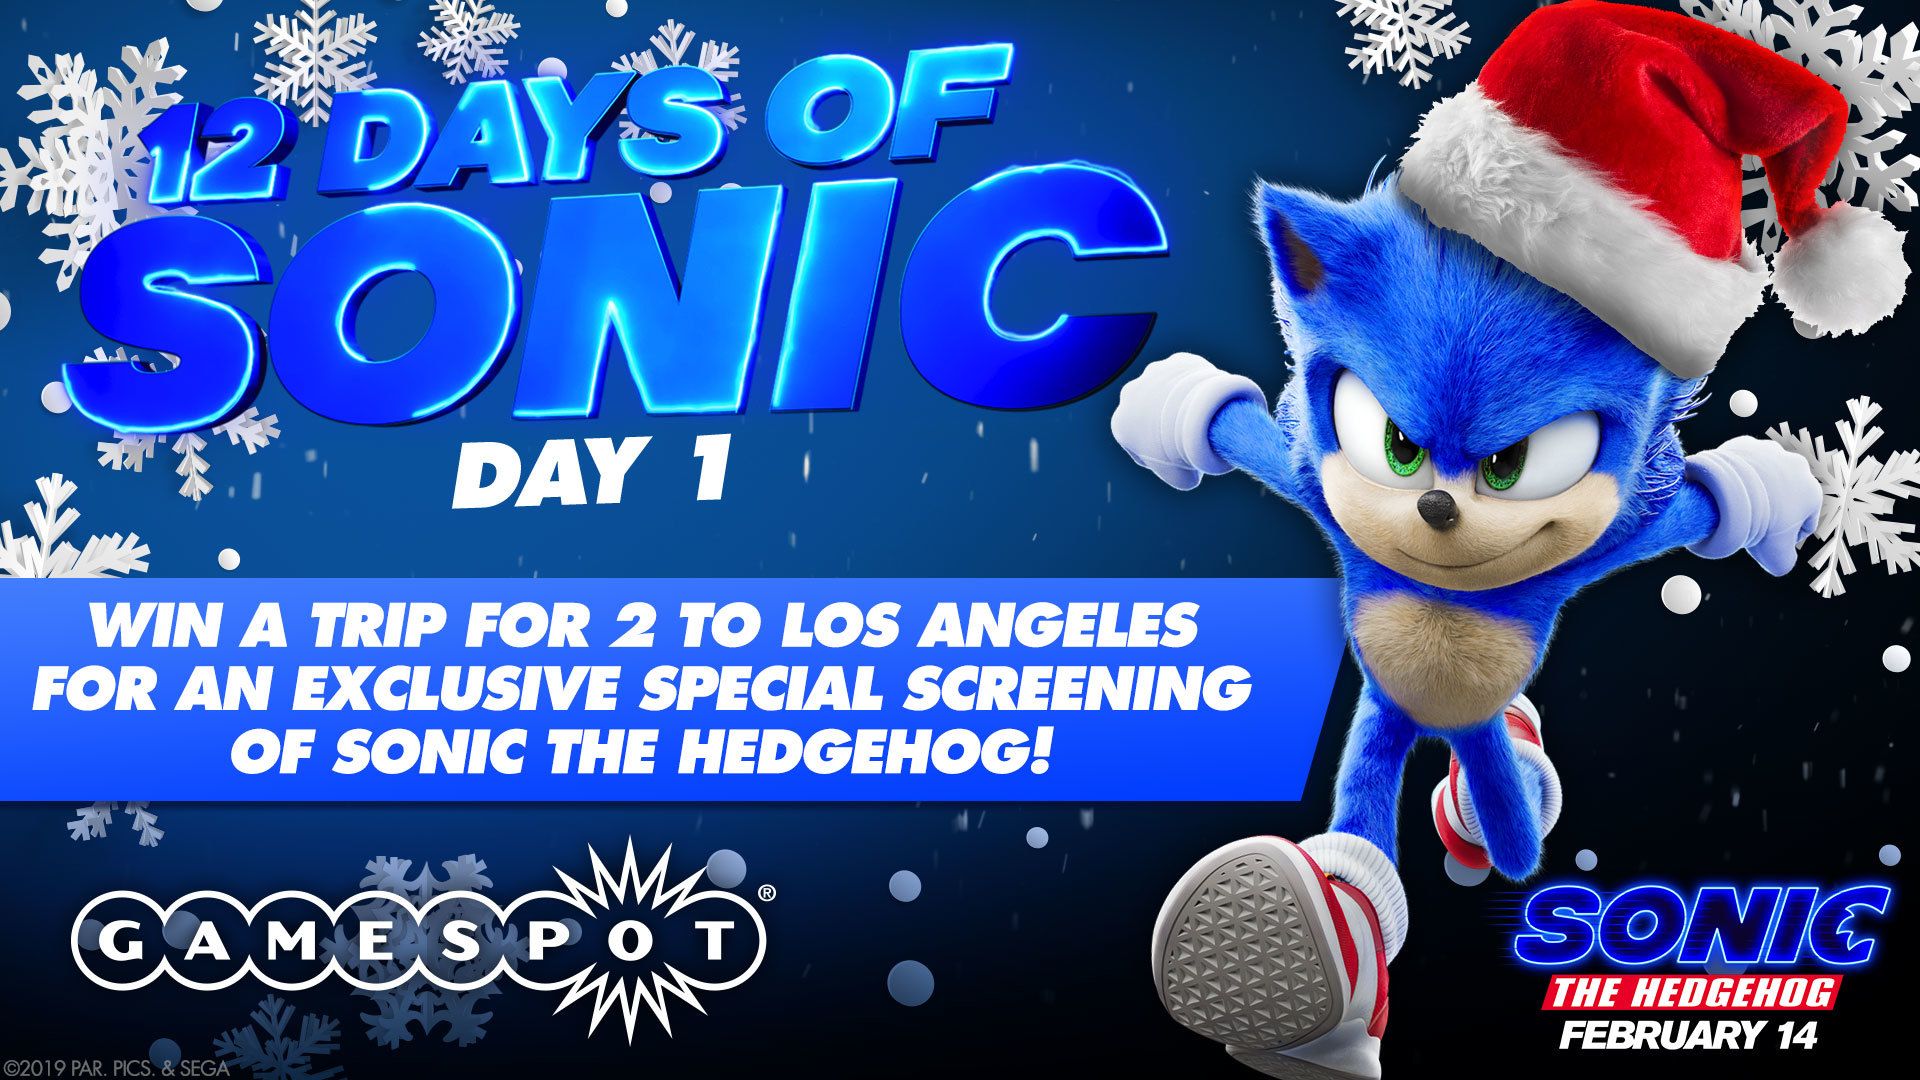 How To Win A Trip To See A Special Screening Of Sonic The Hedgehog